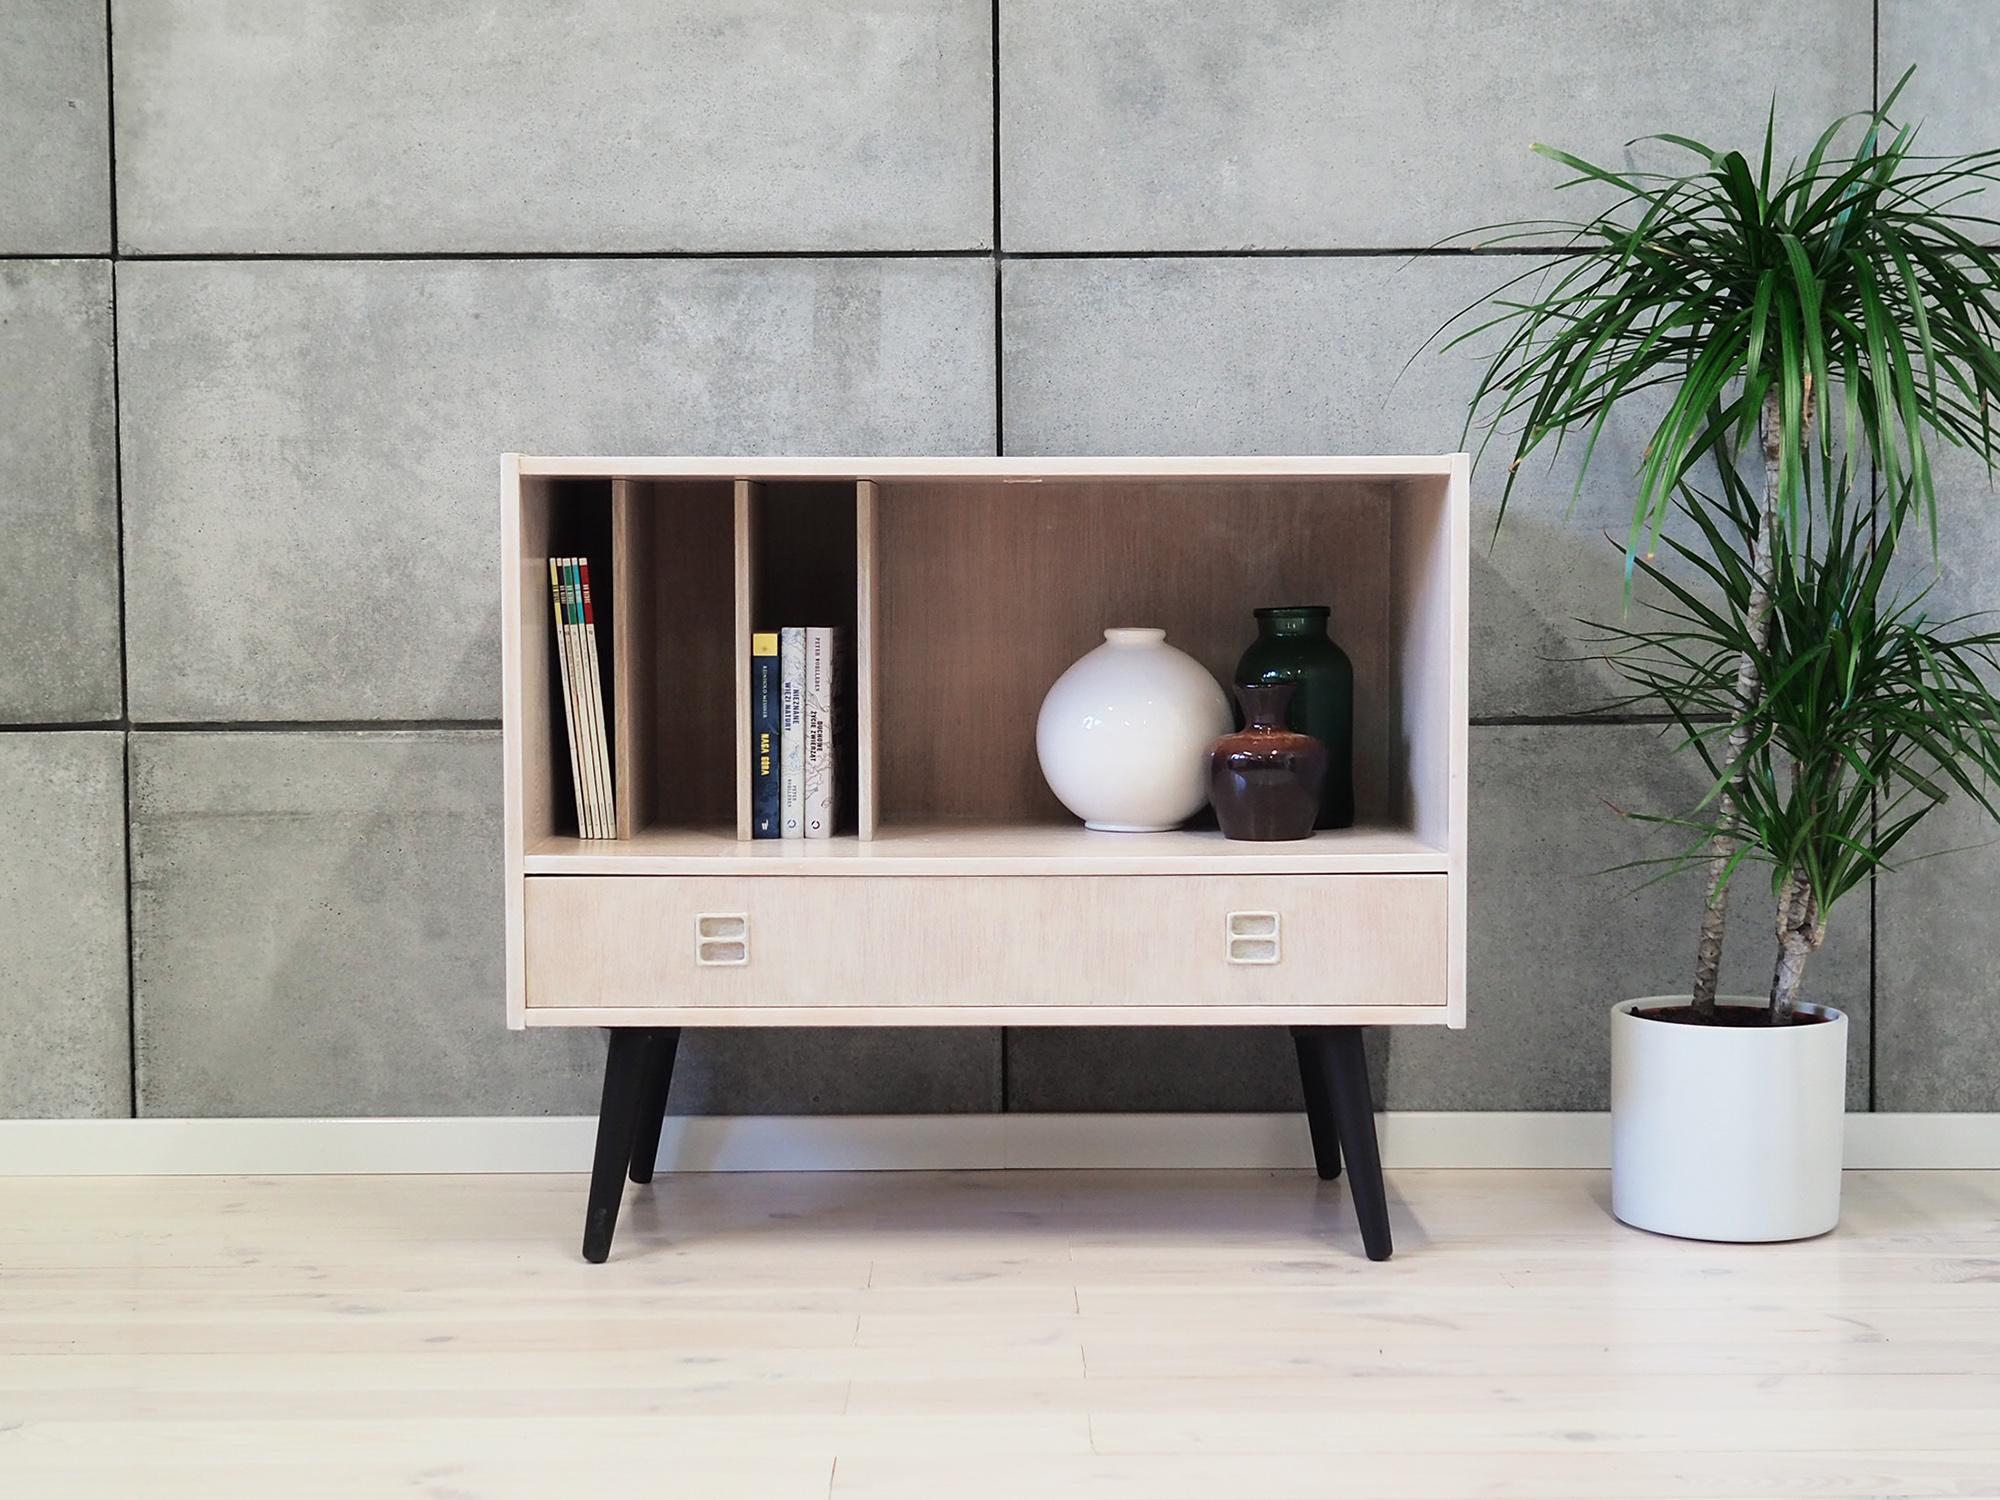 Cabinet made in the 1960s, Swedish production.

The construction is covered with whitened ash veneer. Legs made of solid wood painted black. The surface after refreshing. Inside the space was filled with practical adjustable vertical shelves. The